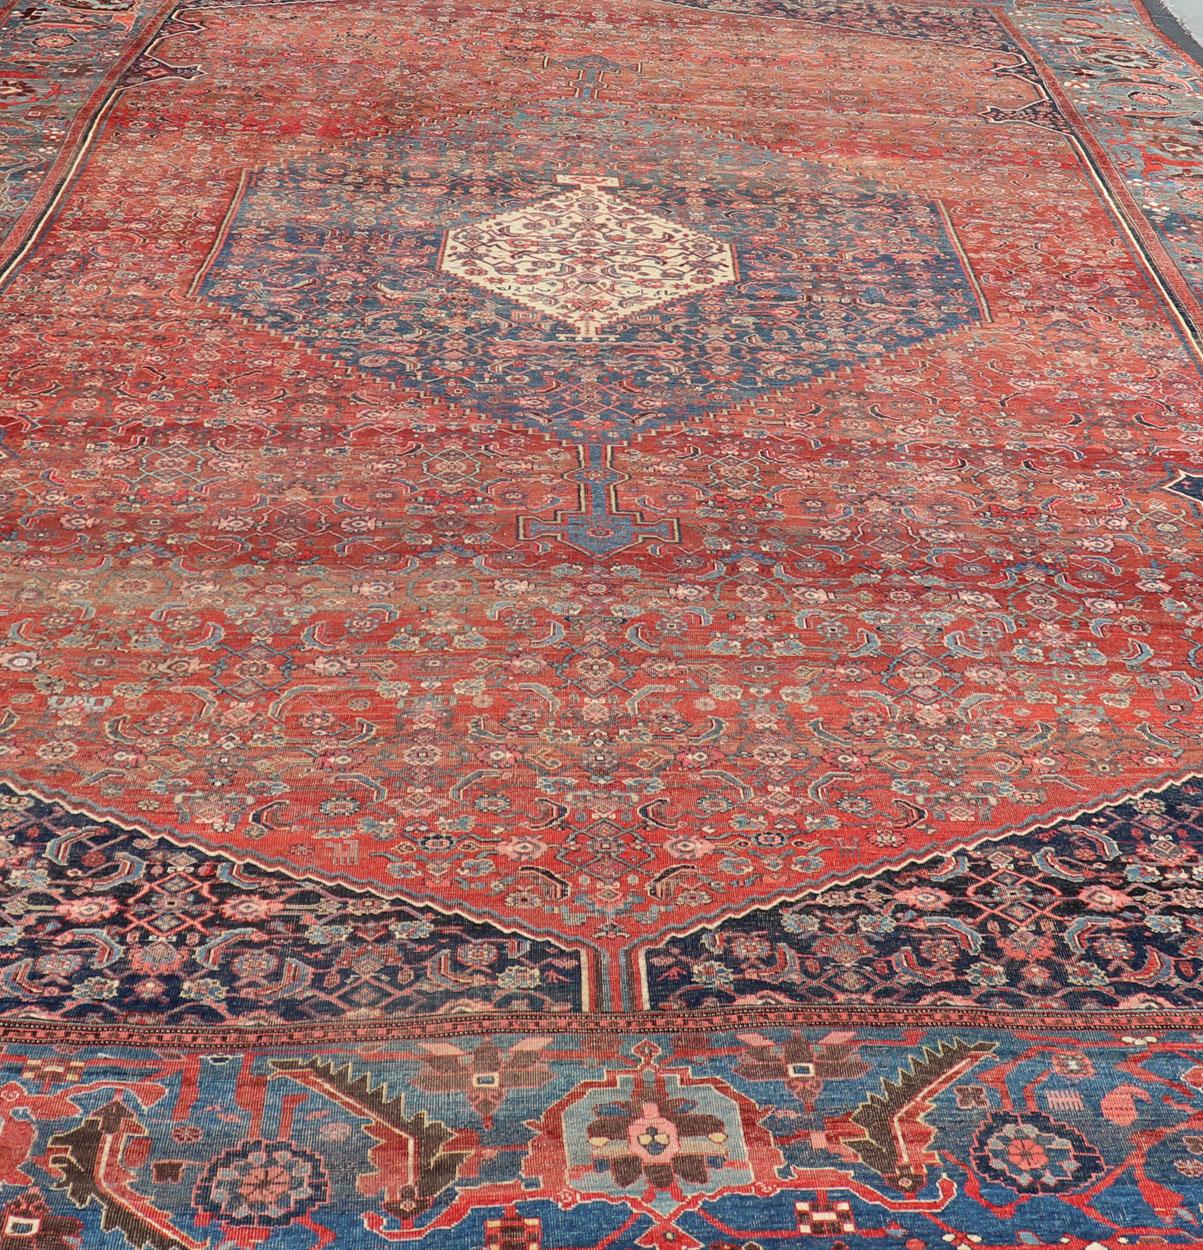 19th Century Very Large Antique Persian Bidjar Rug in Multi Shades of Blue, Tera-Cotta & Red For Sale